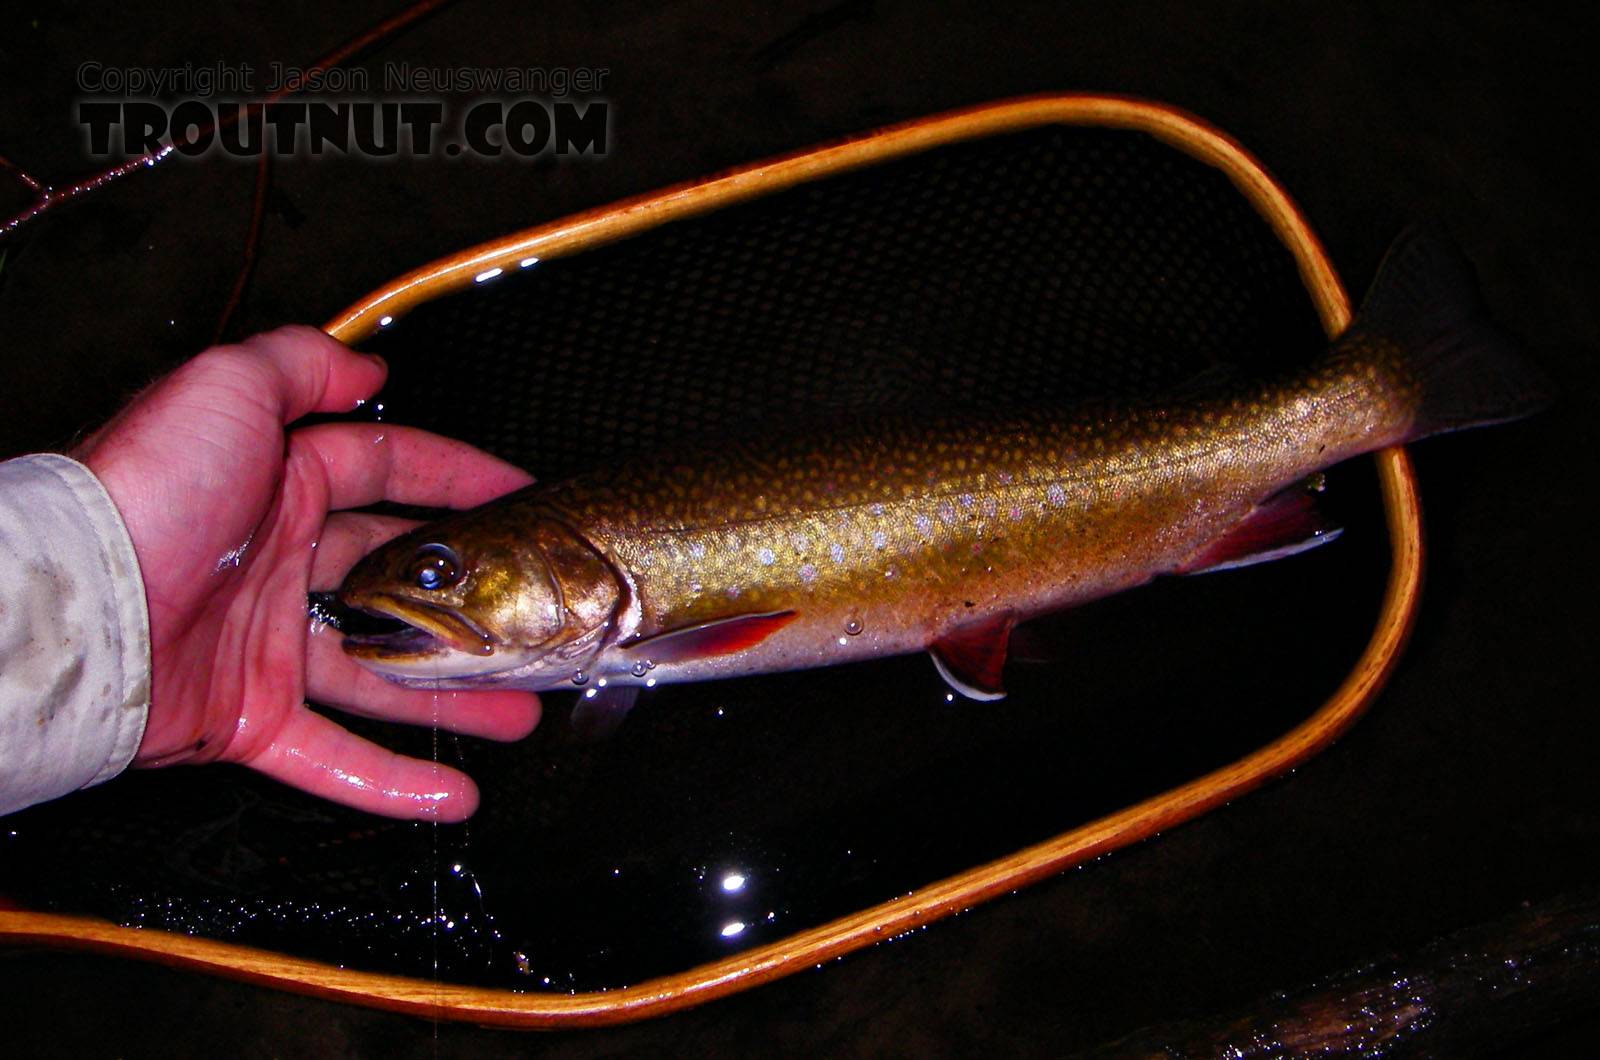 This is my largest brook trout ever (as of June '06), 13 3/4".  It was sporadically surface feeding at dusk and took a nice spinner pattern on the first pass. From the Bois Brule River in Wisconsin.